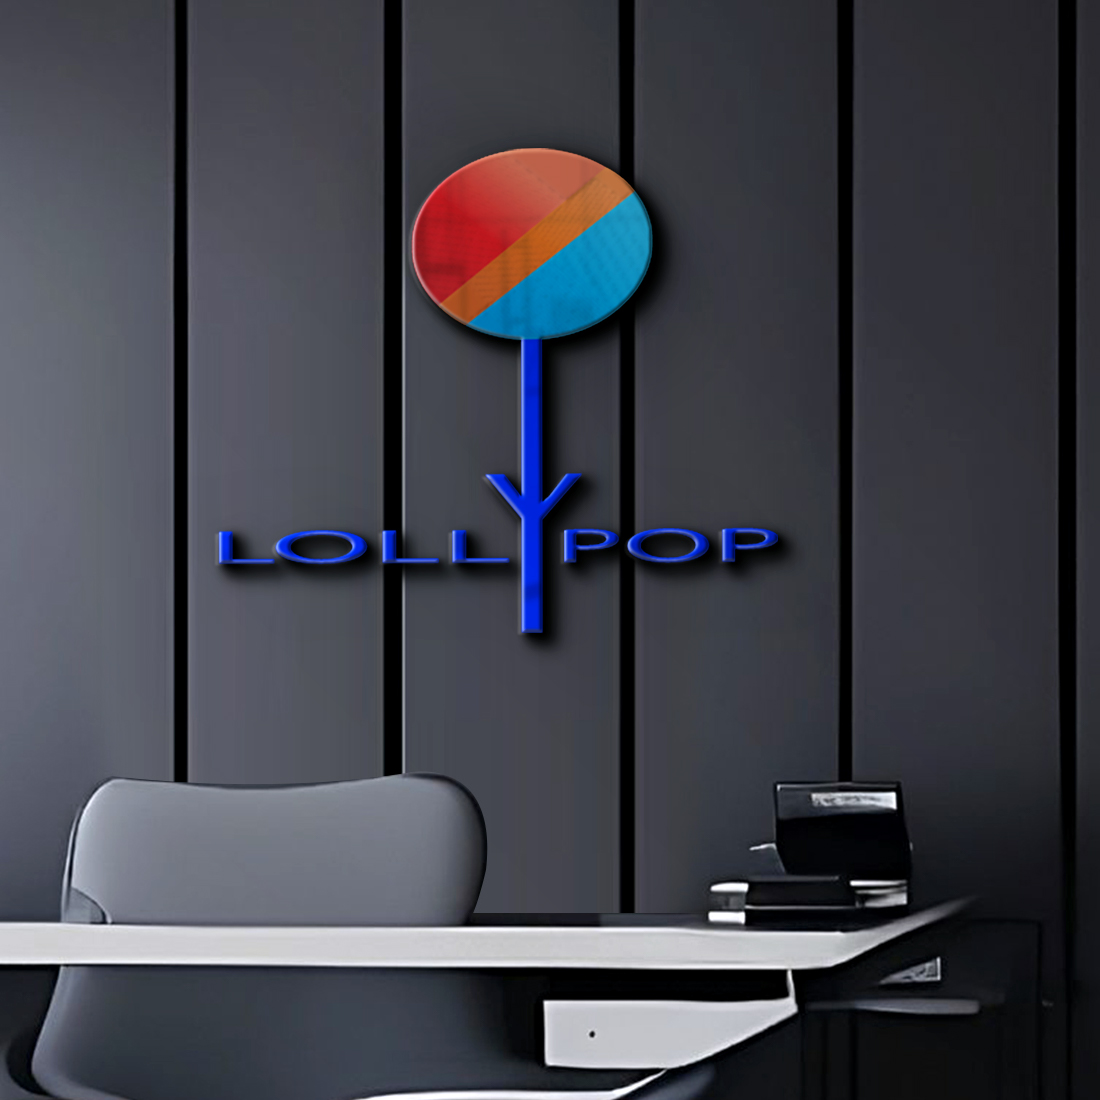 lolly pop preview image.